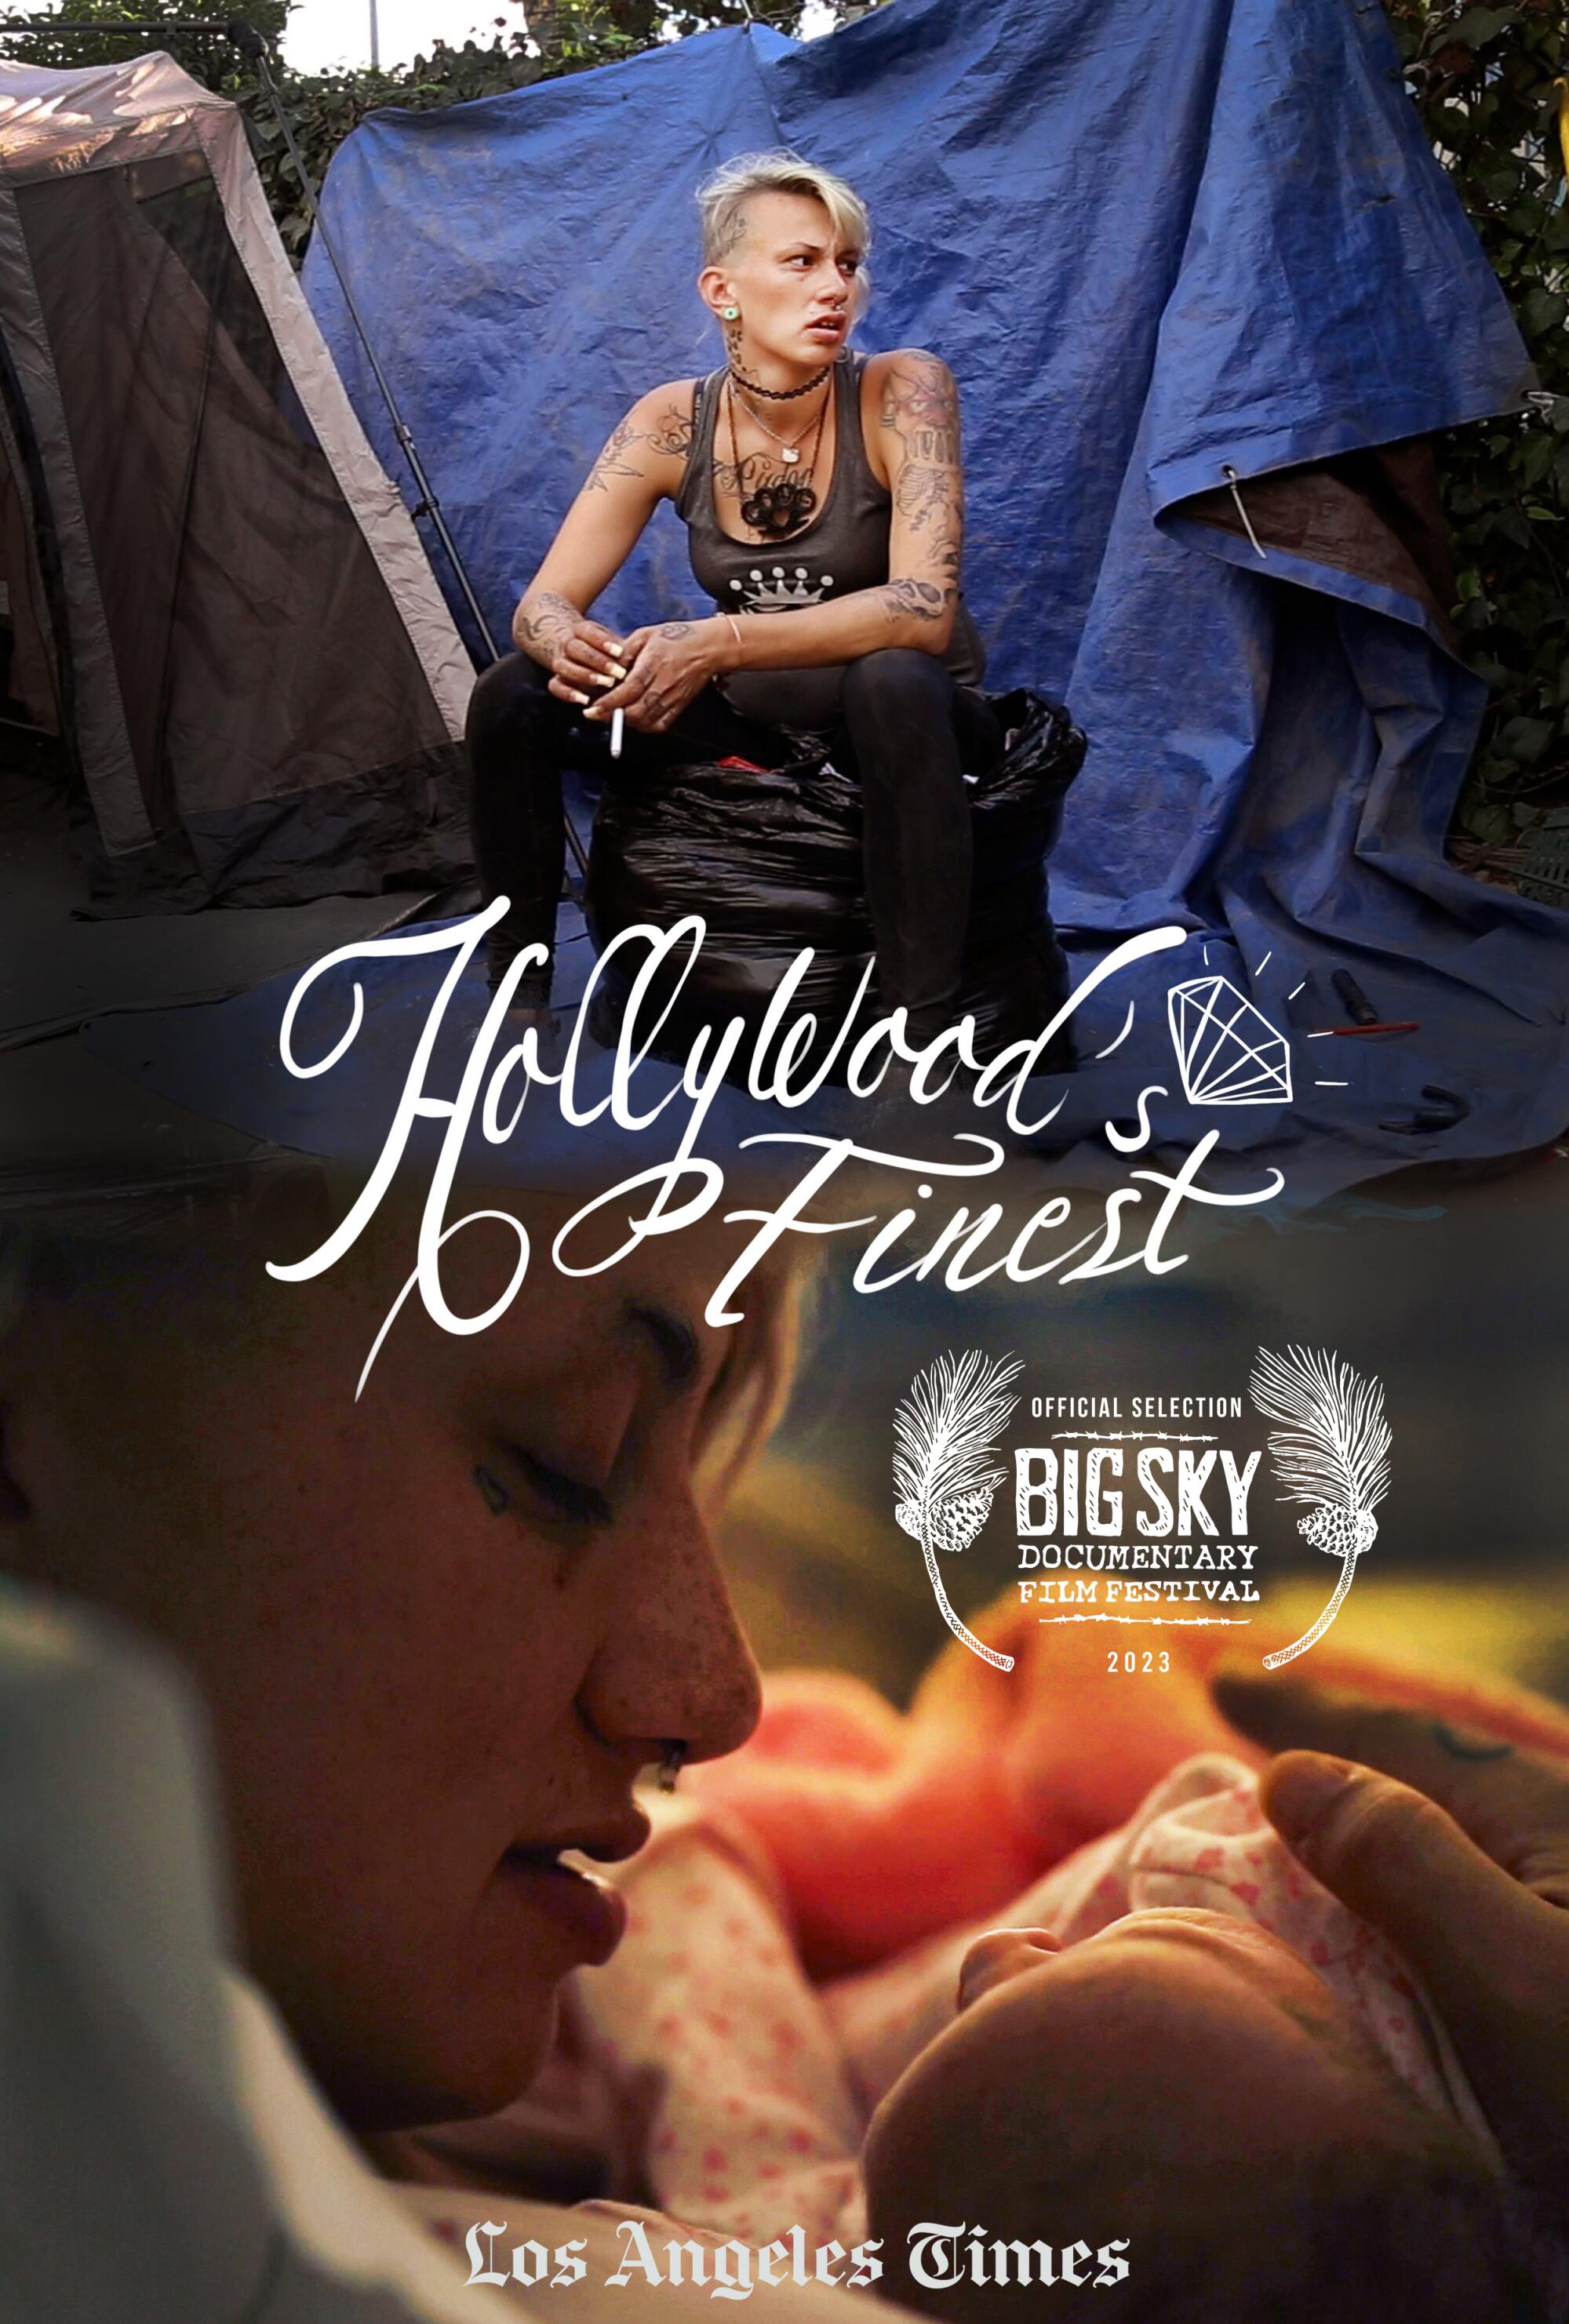 Hollywood's Finest poster. Top: a woman in her 20s holds a cigarette while outside a tent. Bottom: she cradles a newborn